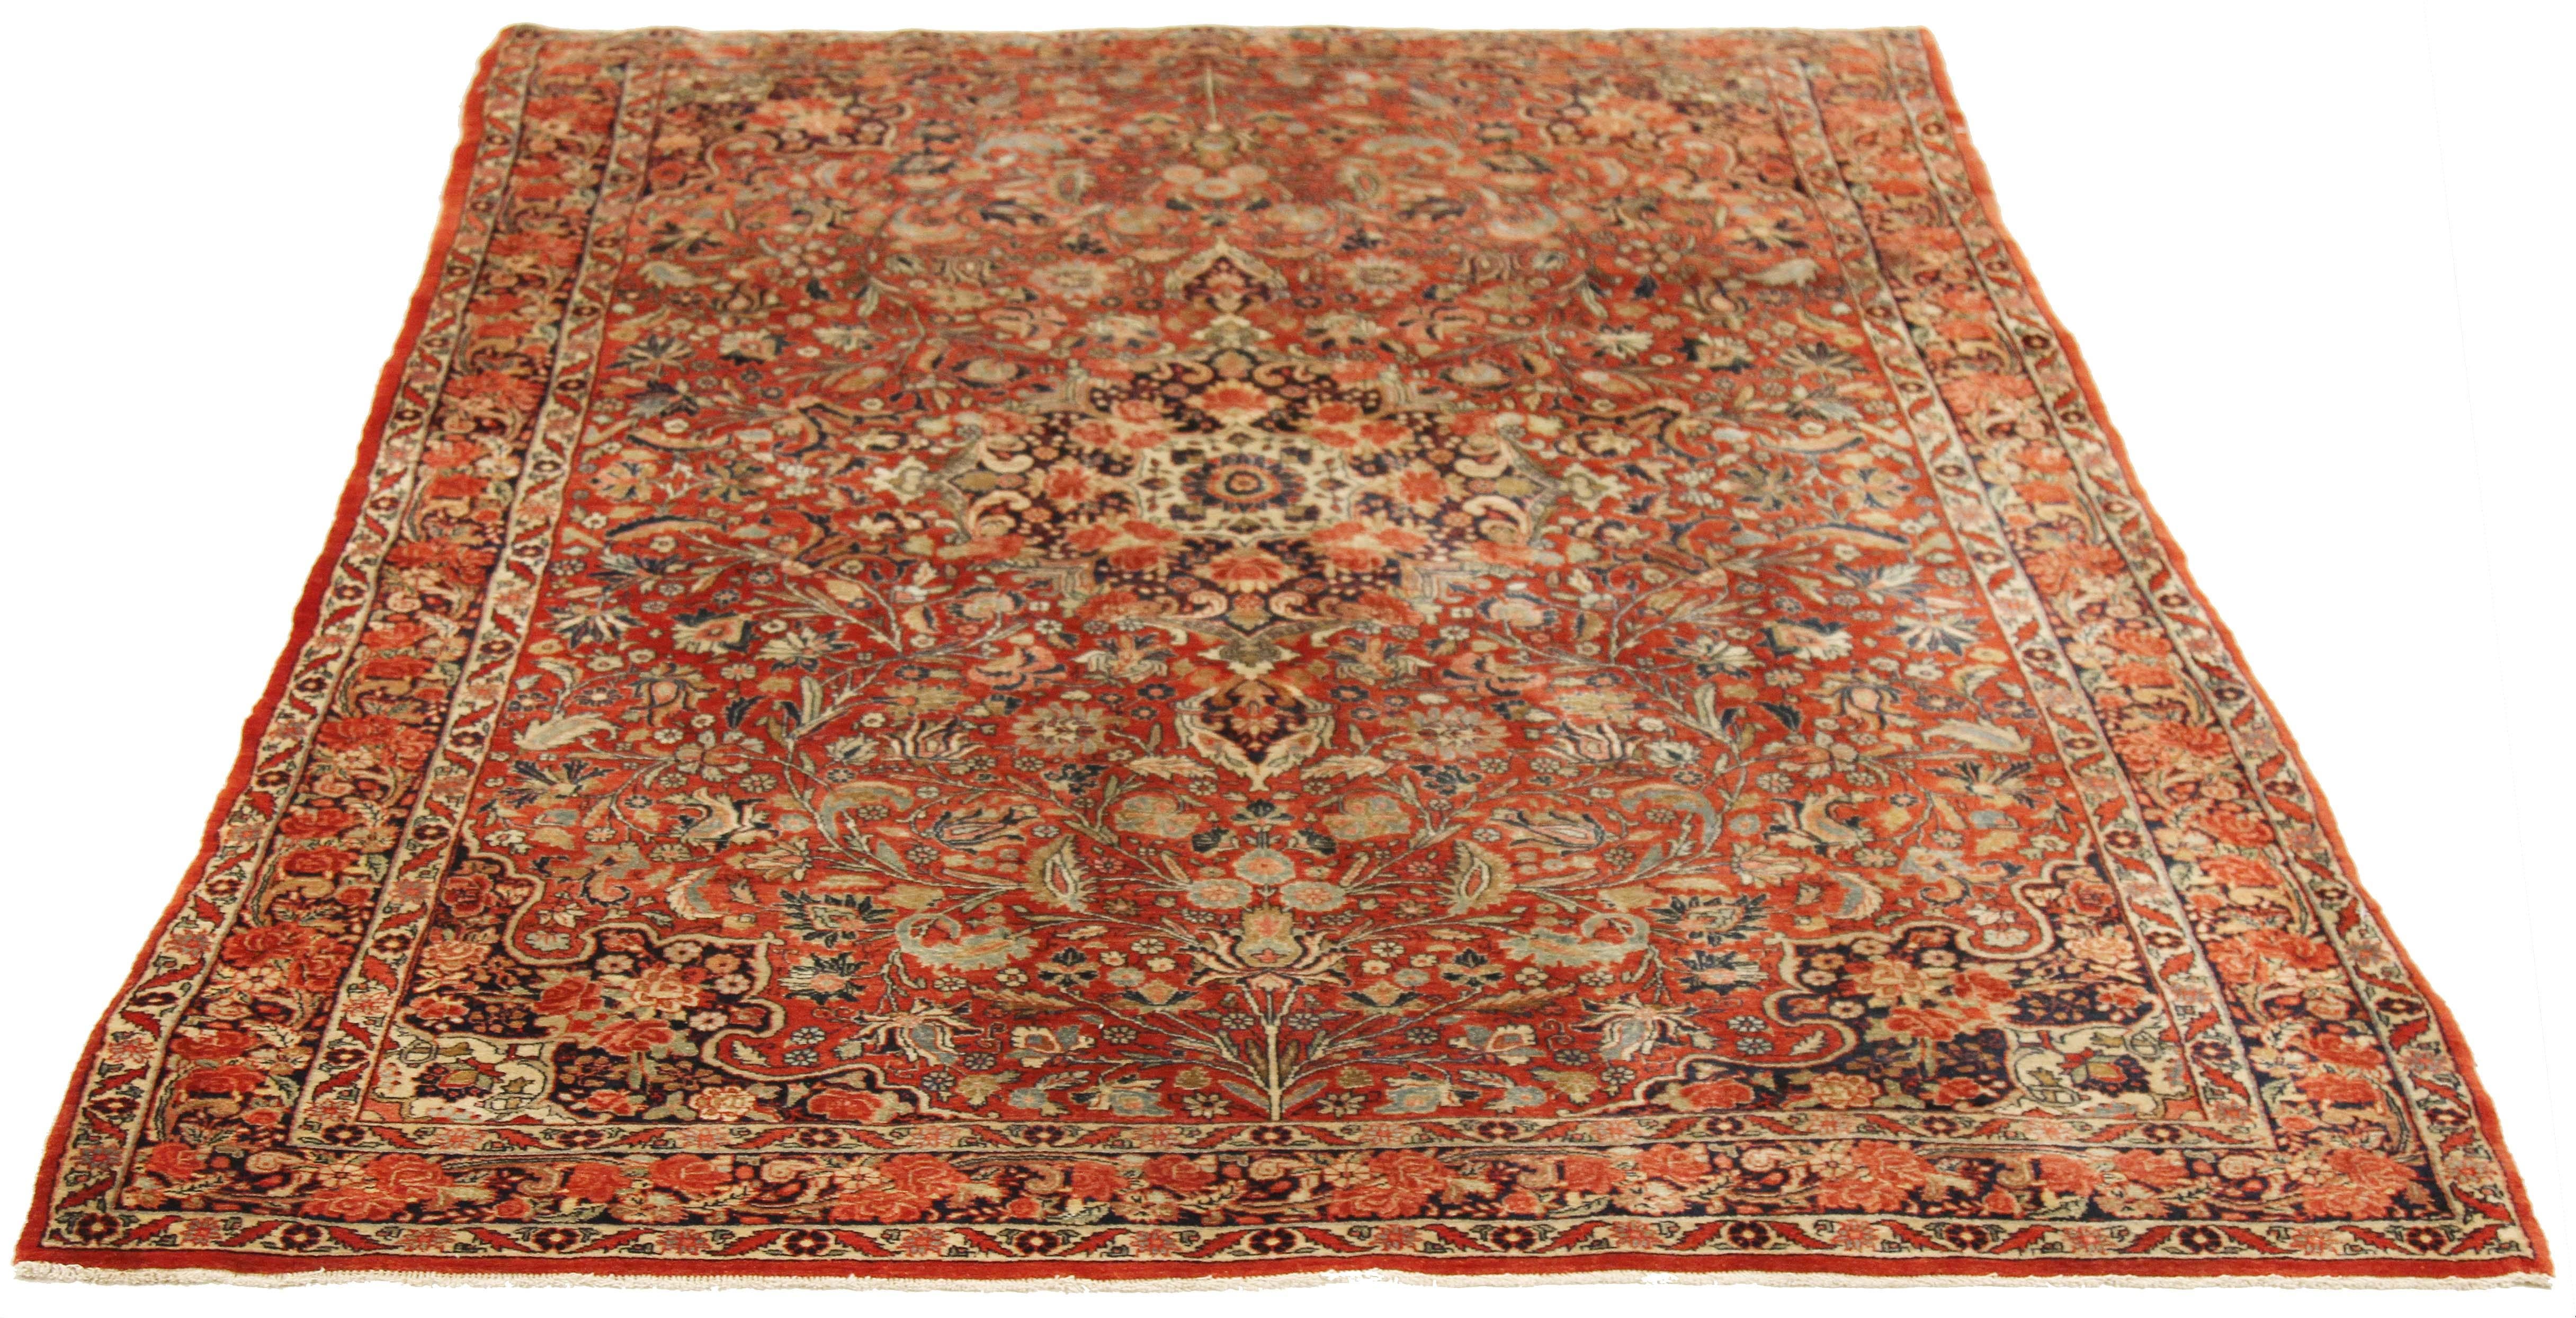 Antique Persian rug handwoven from the finest sheep’s wool and colored with all-natural vegetable dyes that are safe for humans and pets. It’s a traditional Bijar design featuring lovely colors of red, ivory, gray and black. It has all-over rows of